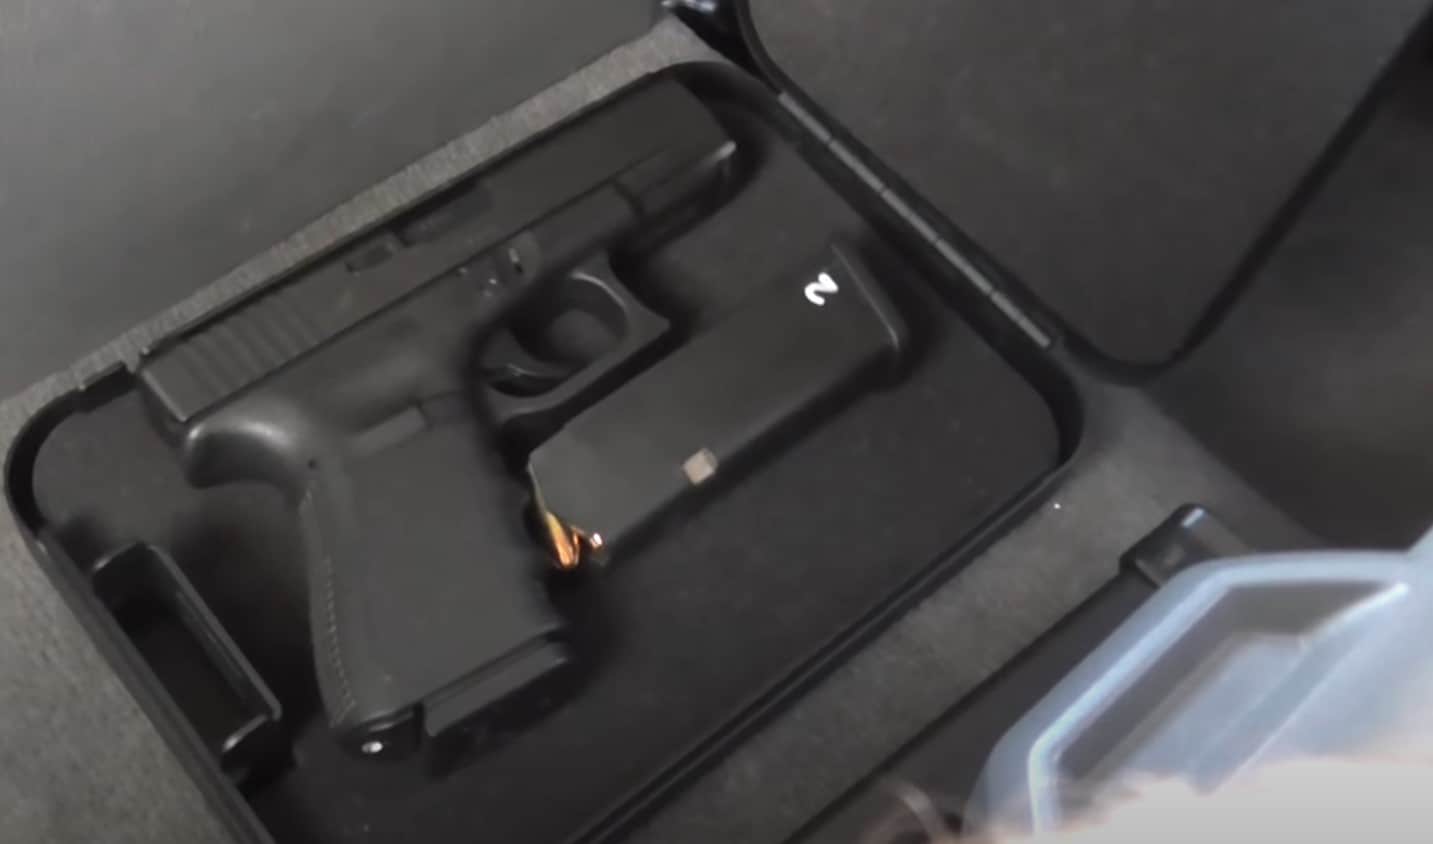 How To Install A Gun Safe In Your Car